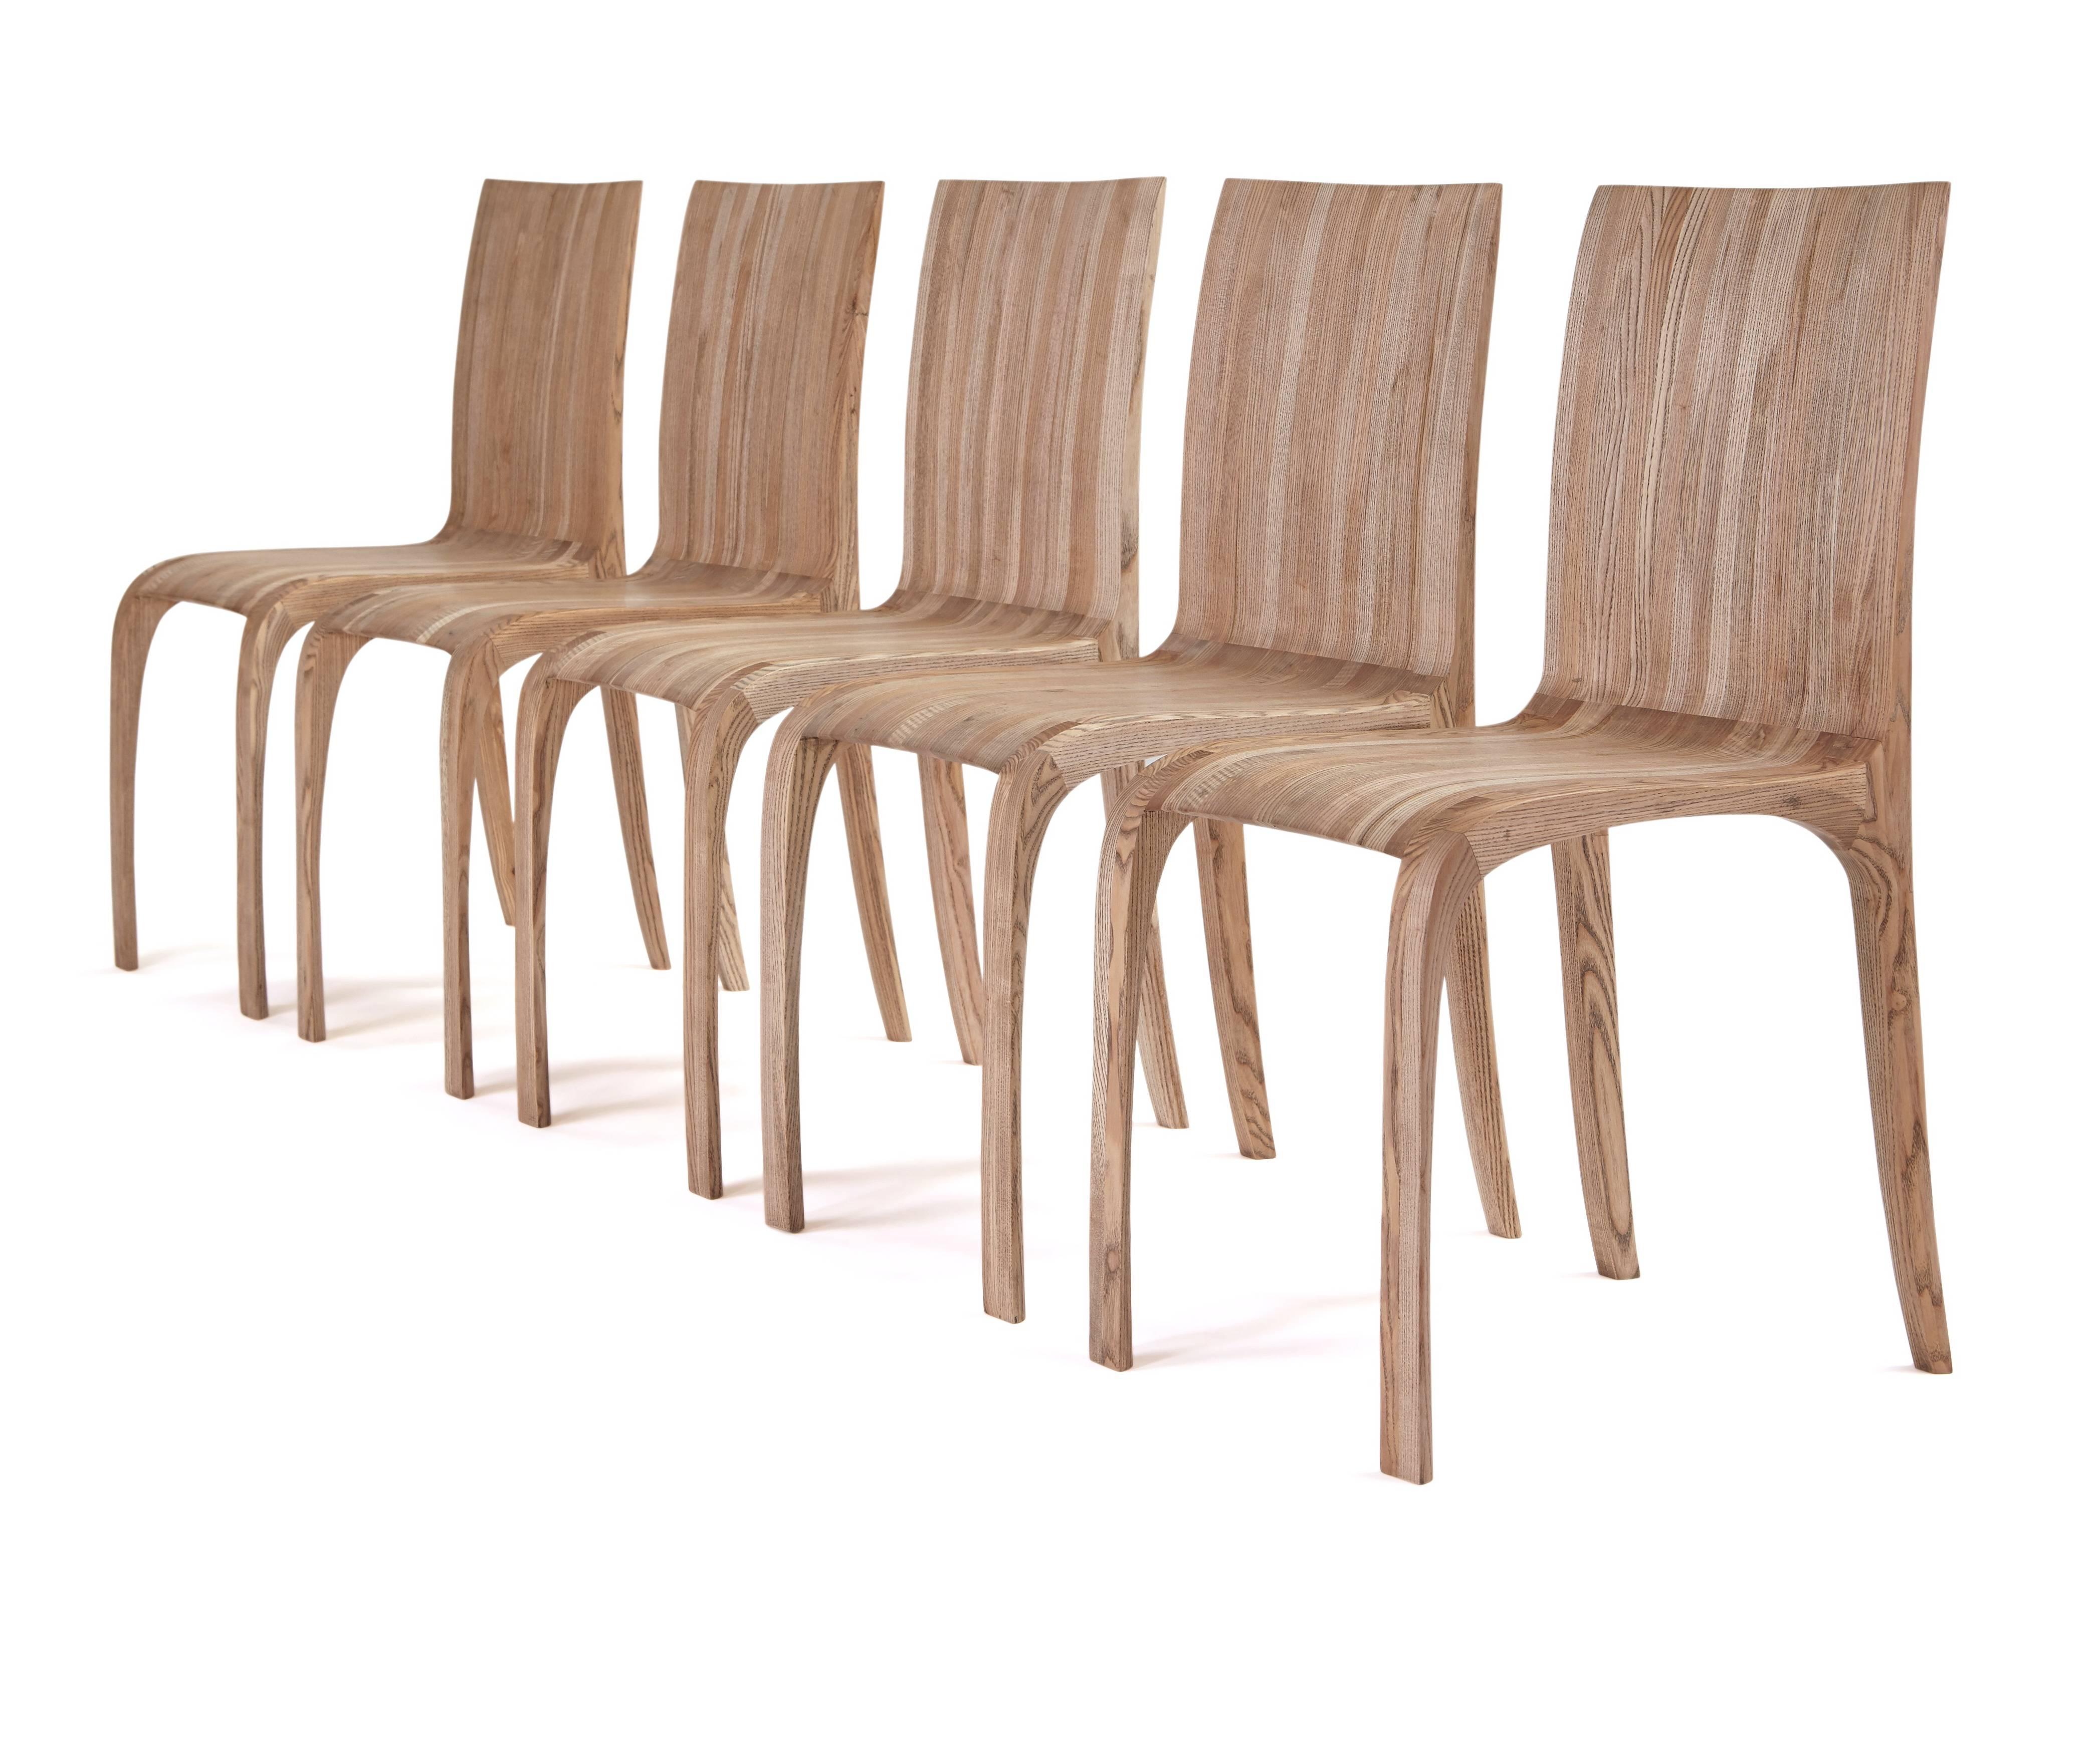 Ash Award winning rippled, ash hand-carved chairs. by Jonathan Field